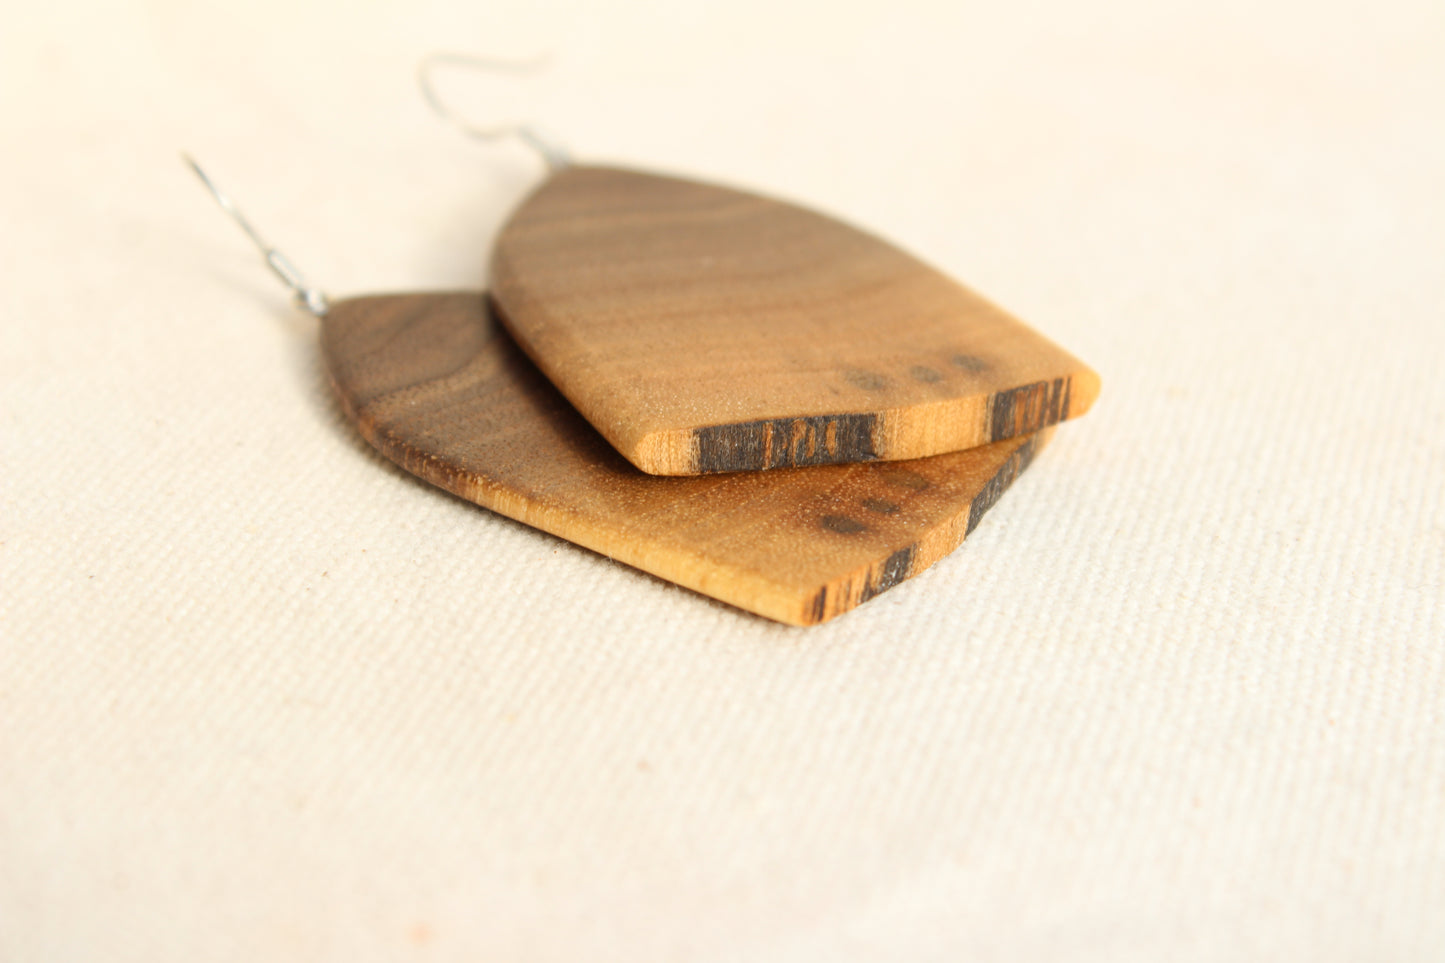 Natural Wooden Earrings - Black Walnut wood with live edge design